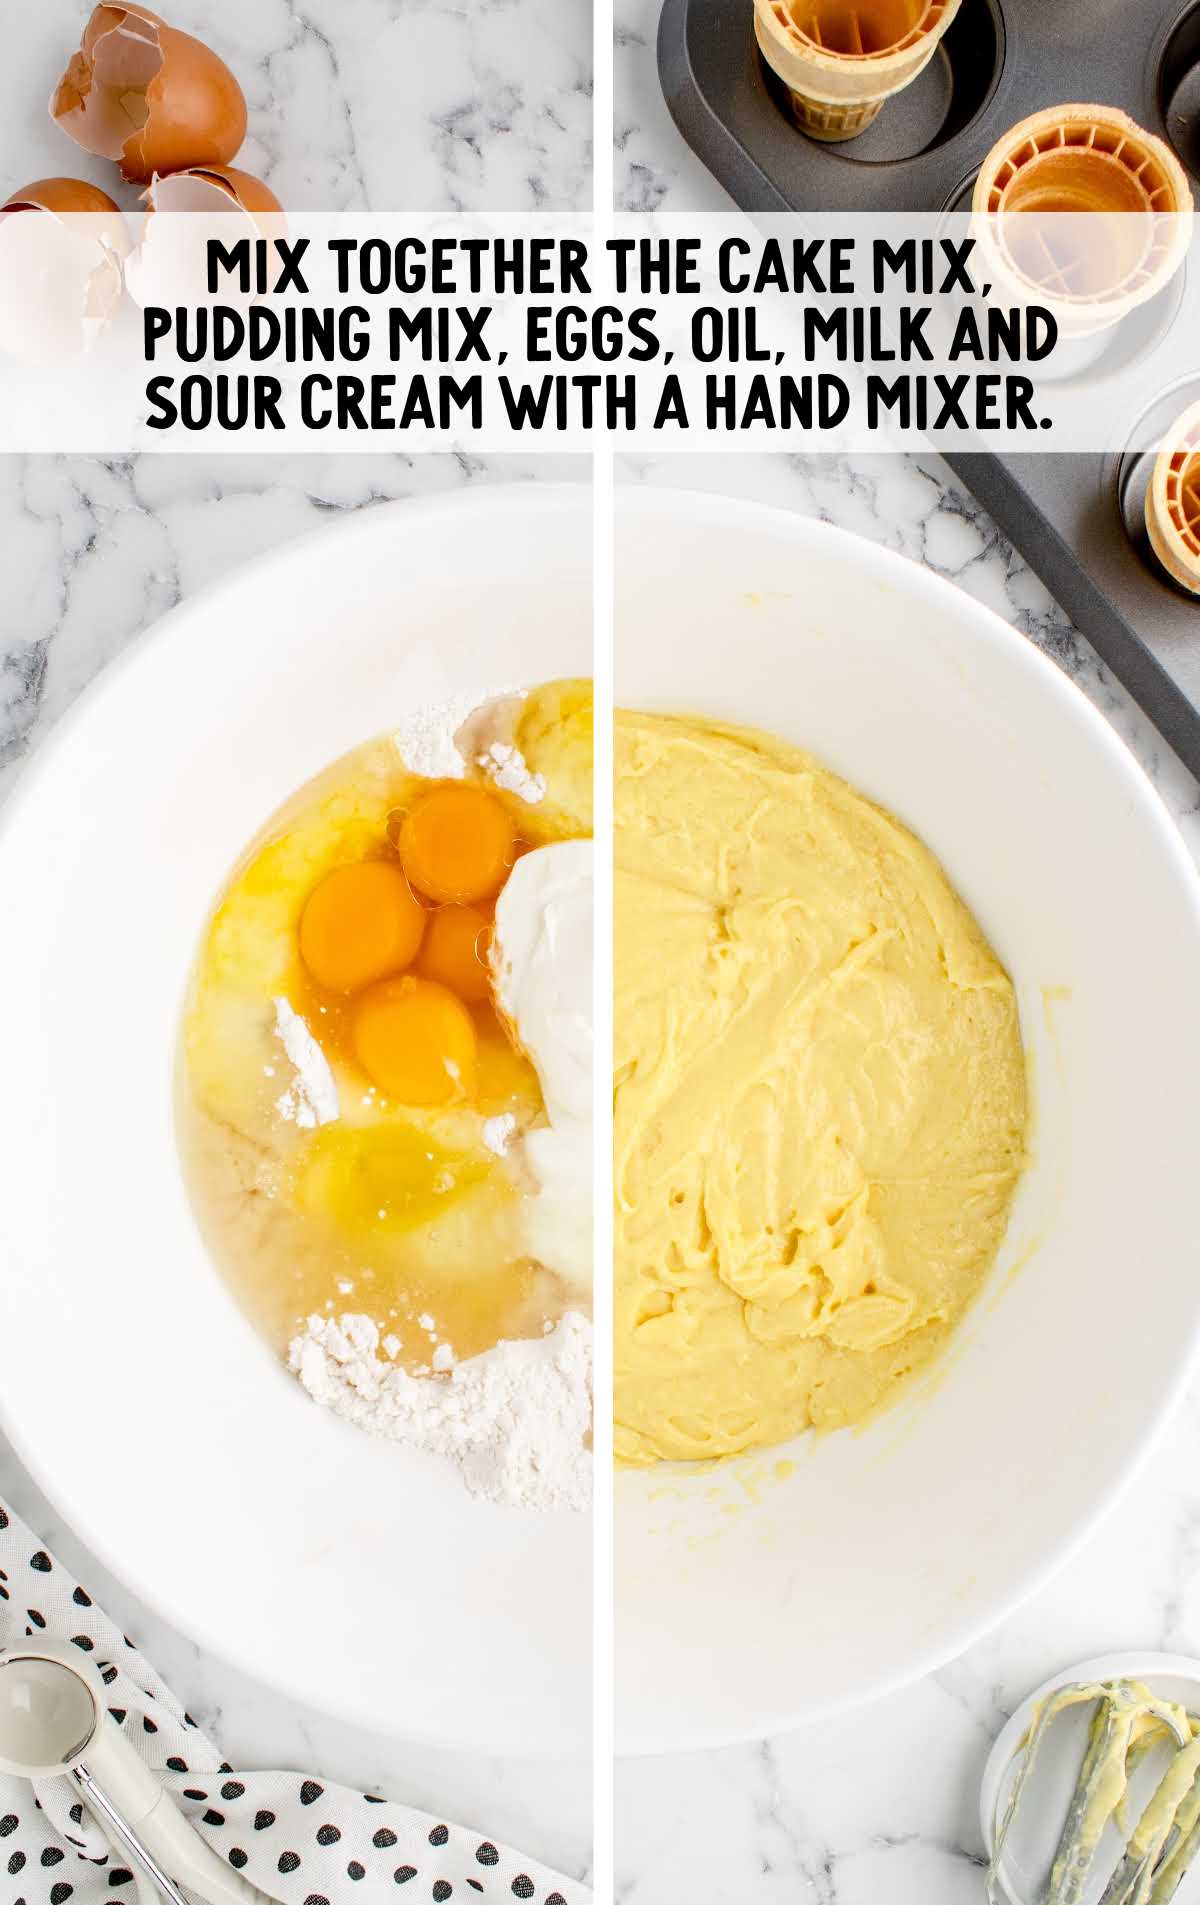 cake mix, pudding mix, eggs, oil, milk, and sour cream mixed together